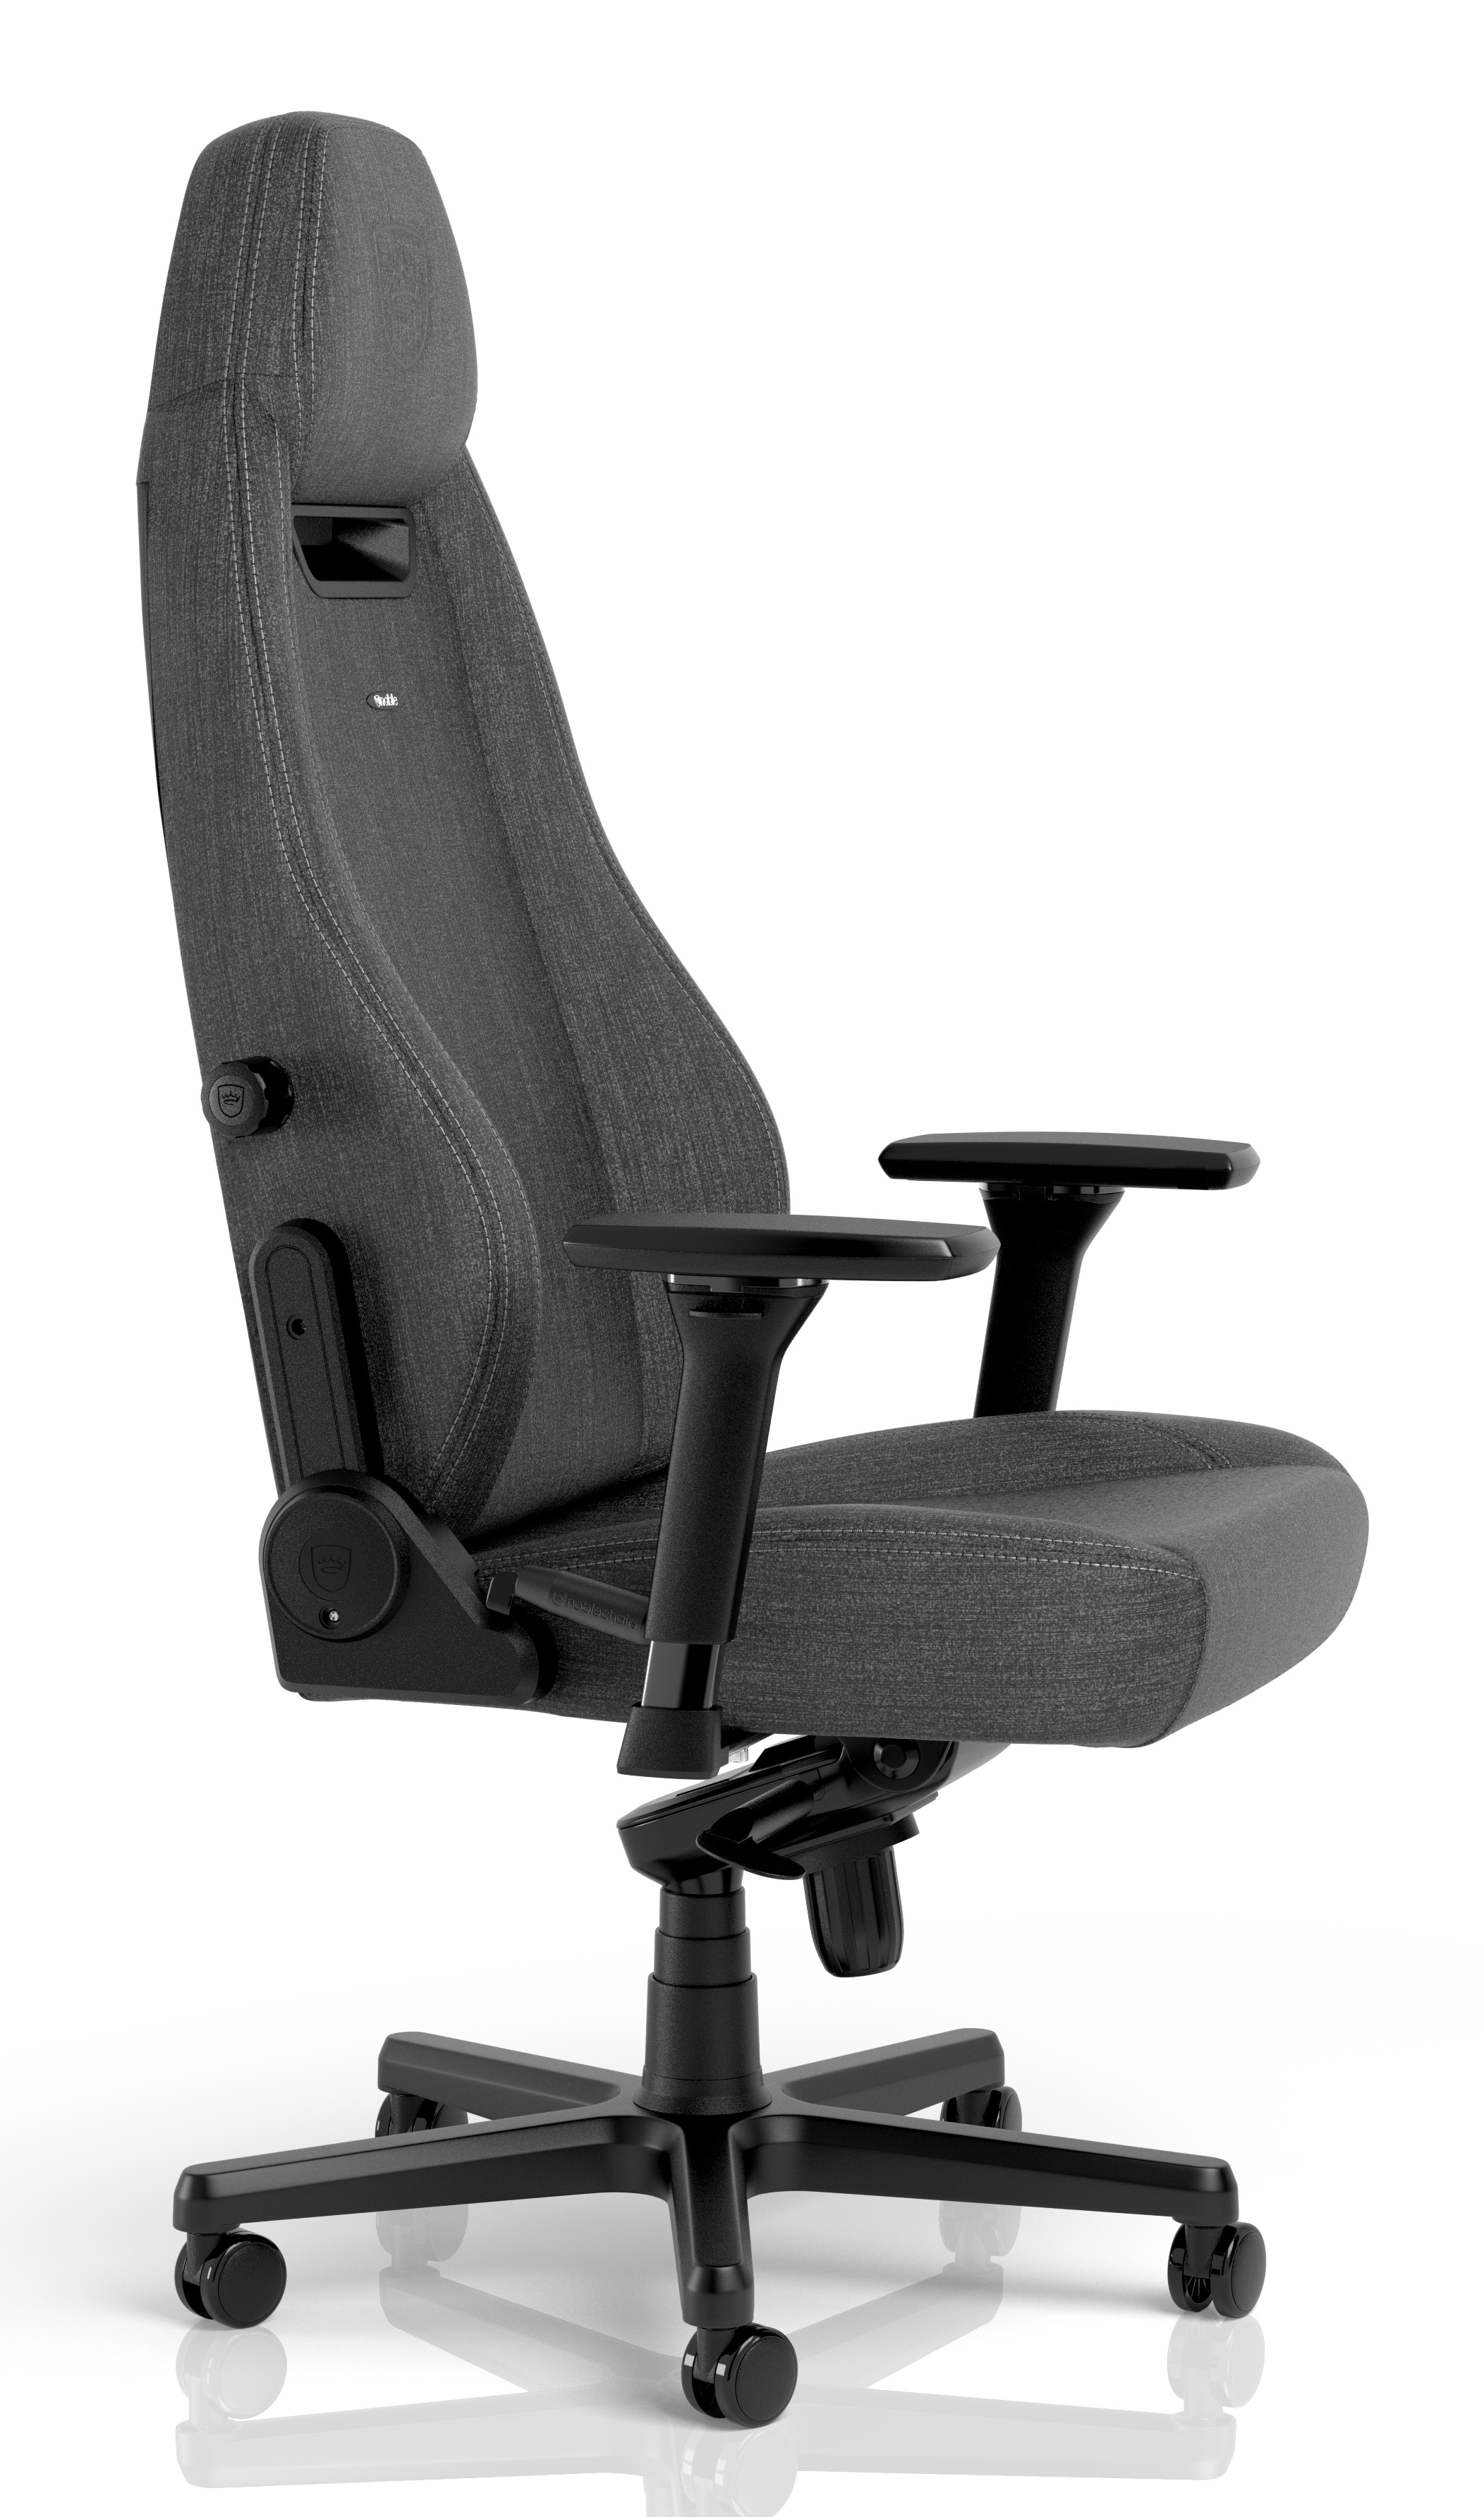 noblechairs - noblechairs LEGEND Gaming Chair TX Edition – Anthracite Grey